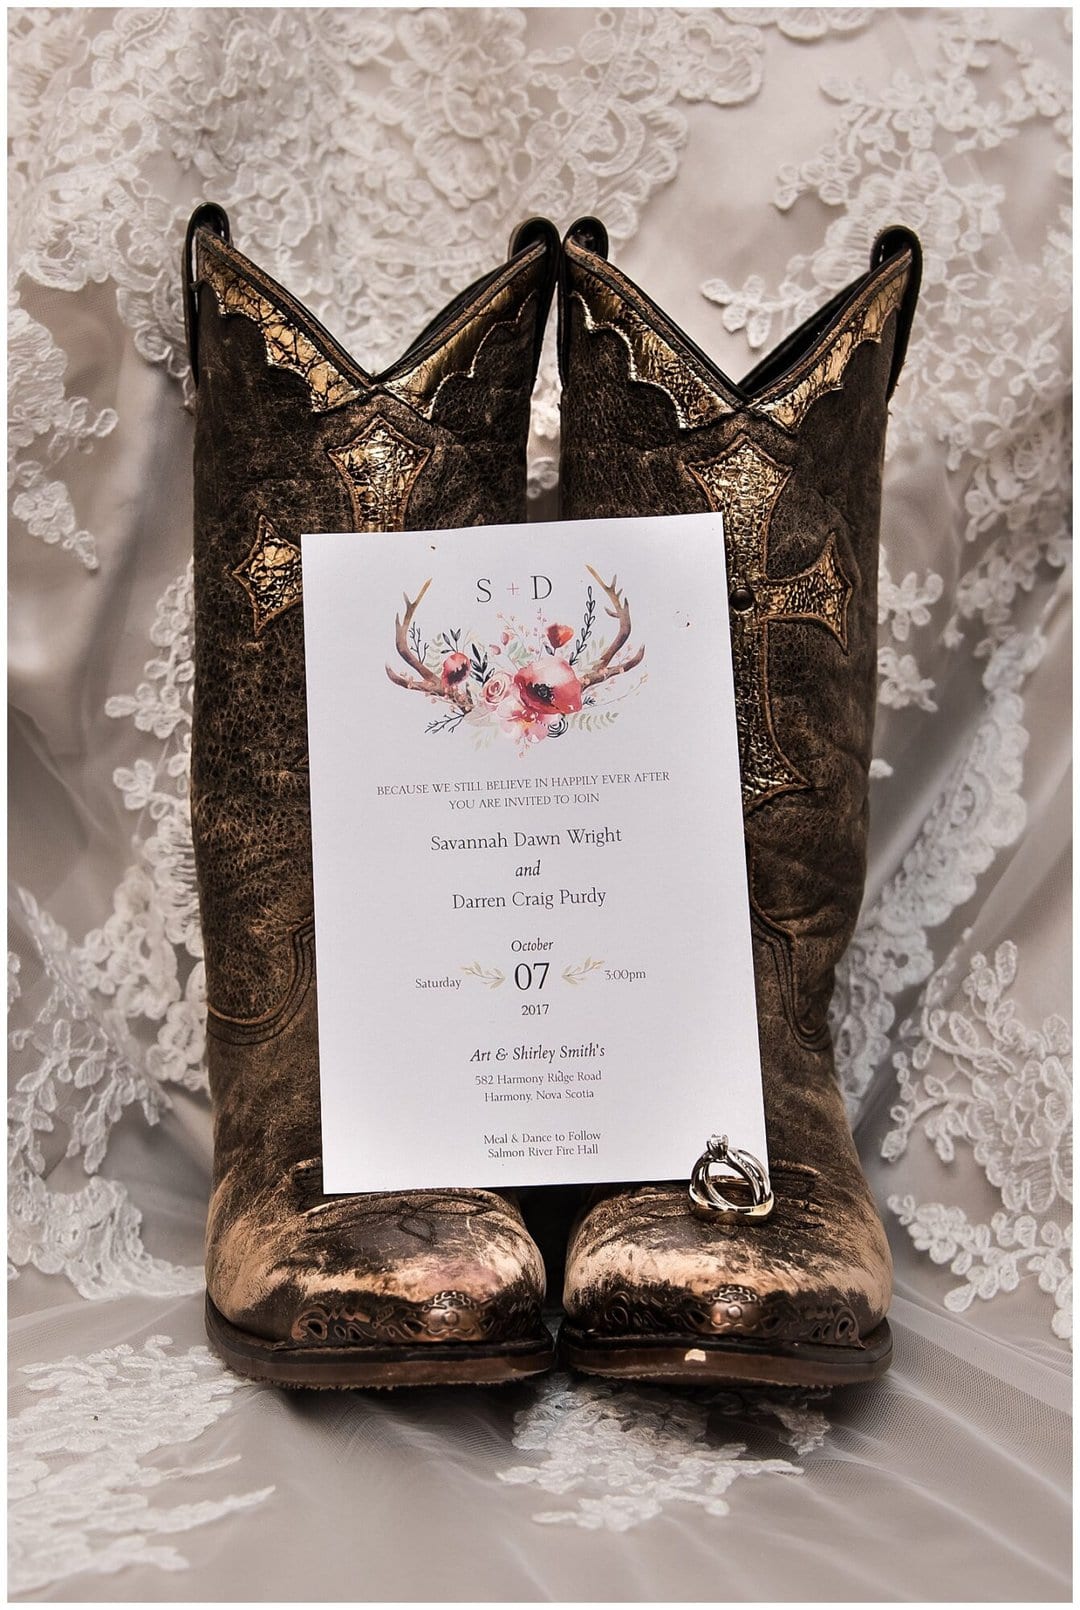 A beautiful rustic wedding invitation adorned with deer antlers.